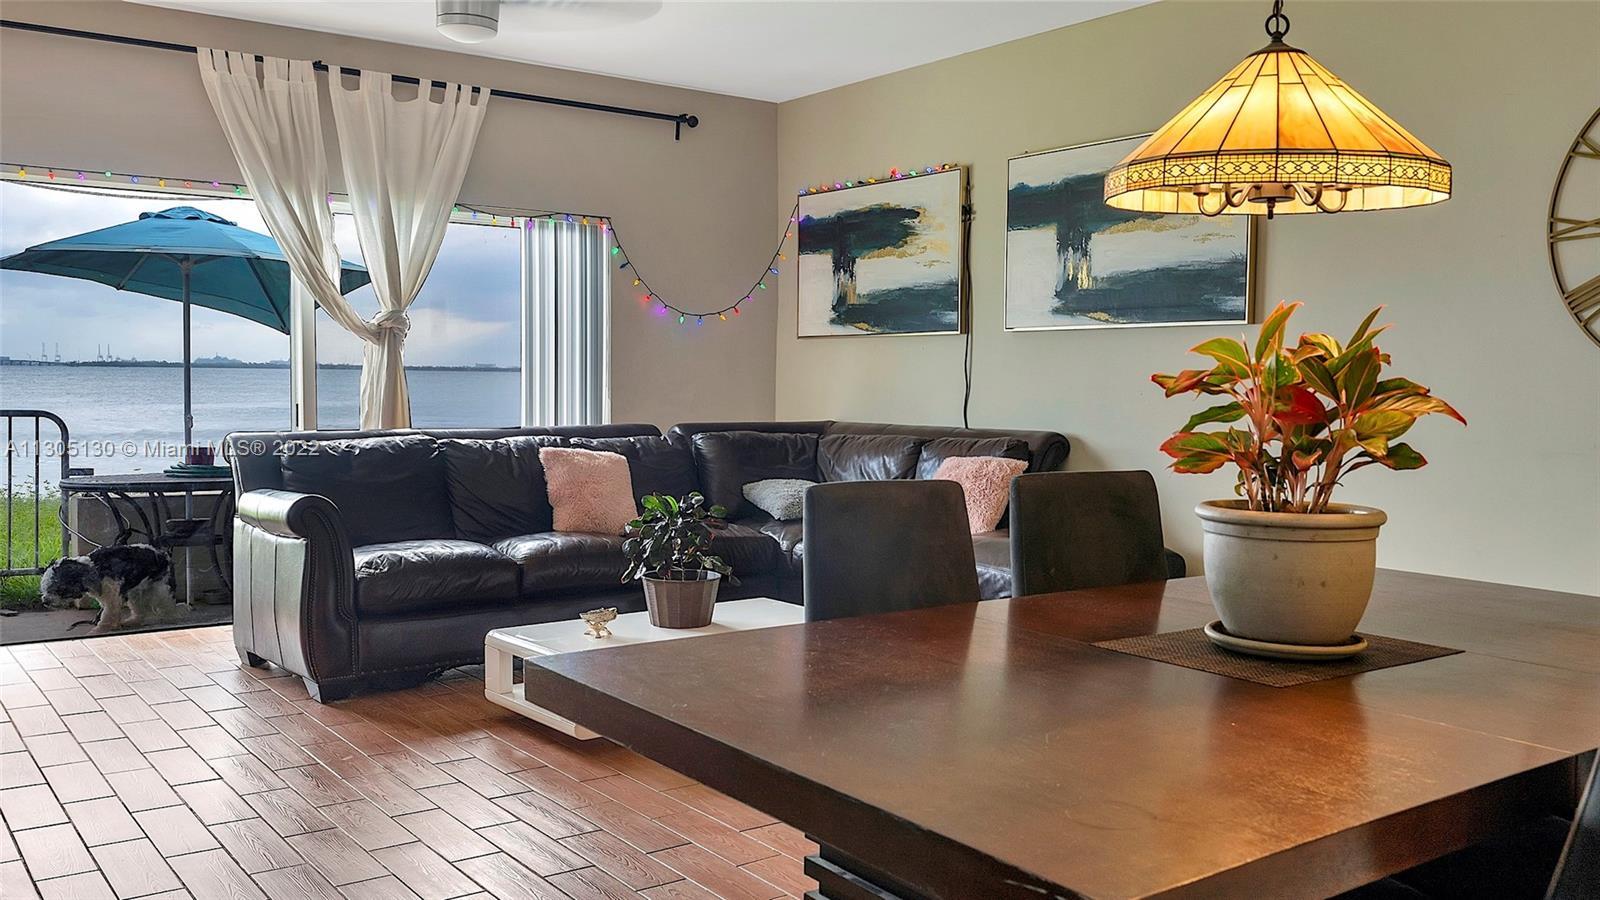 Make yourself at home in our cozy and modern apartment in the picturesque NorthBay right at the foot